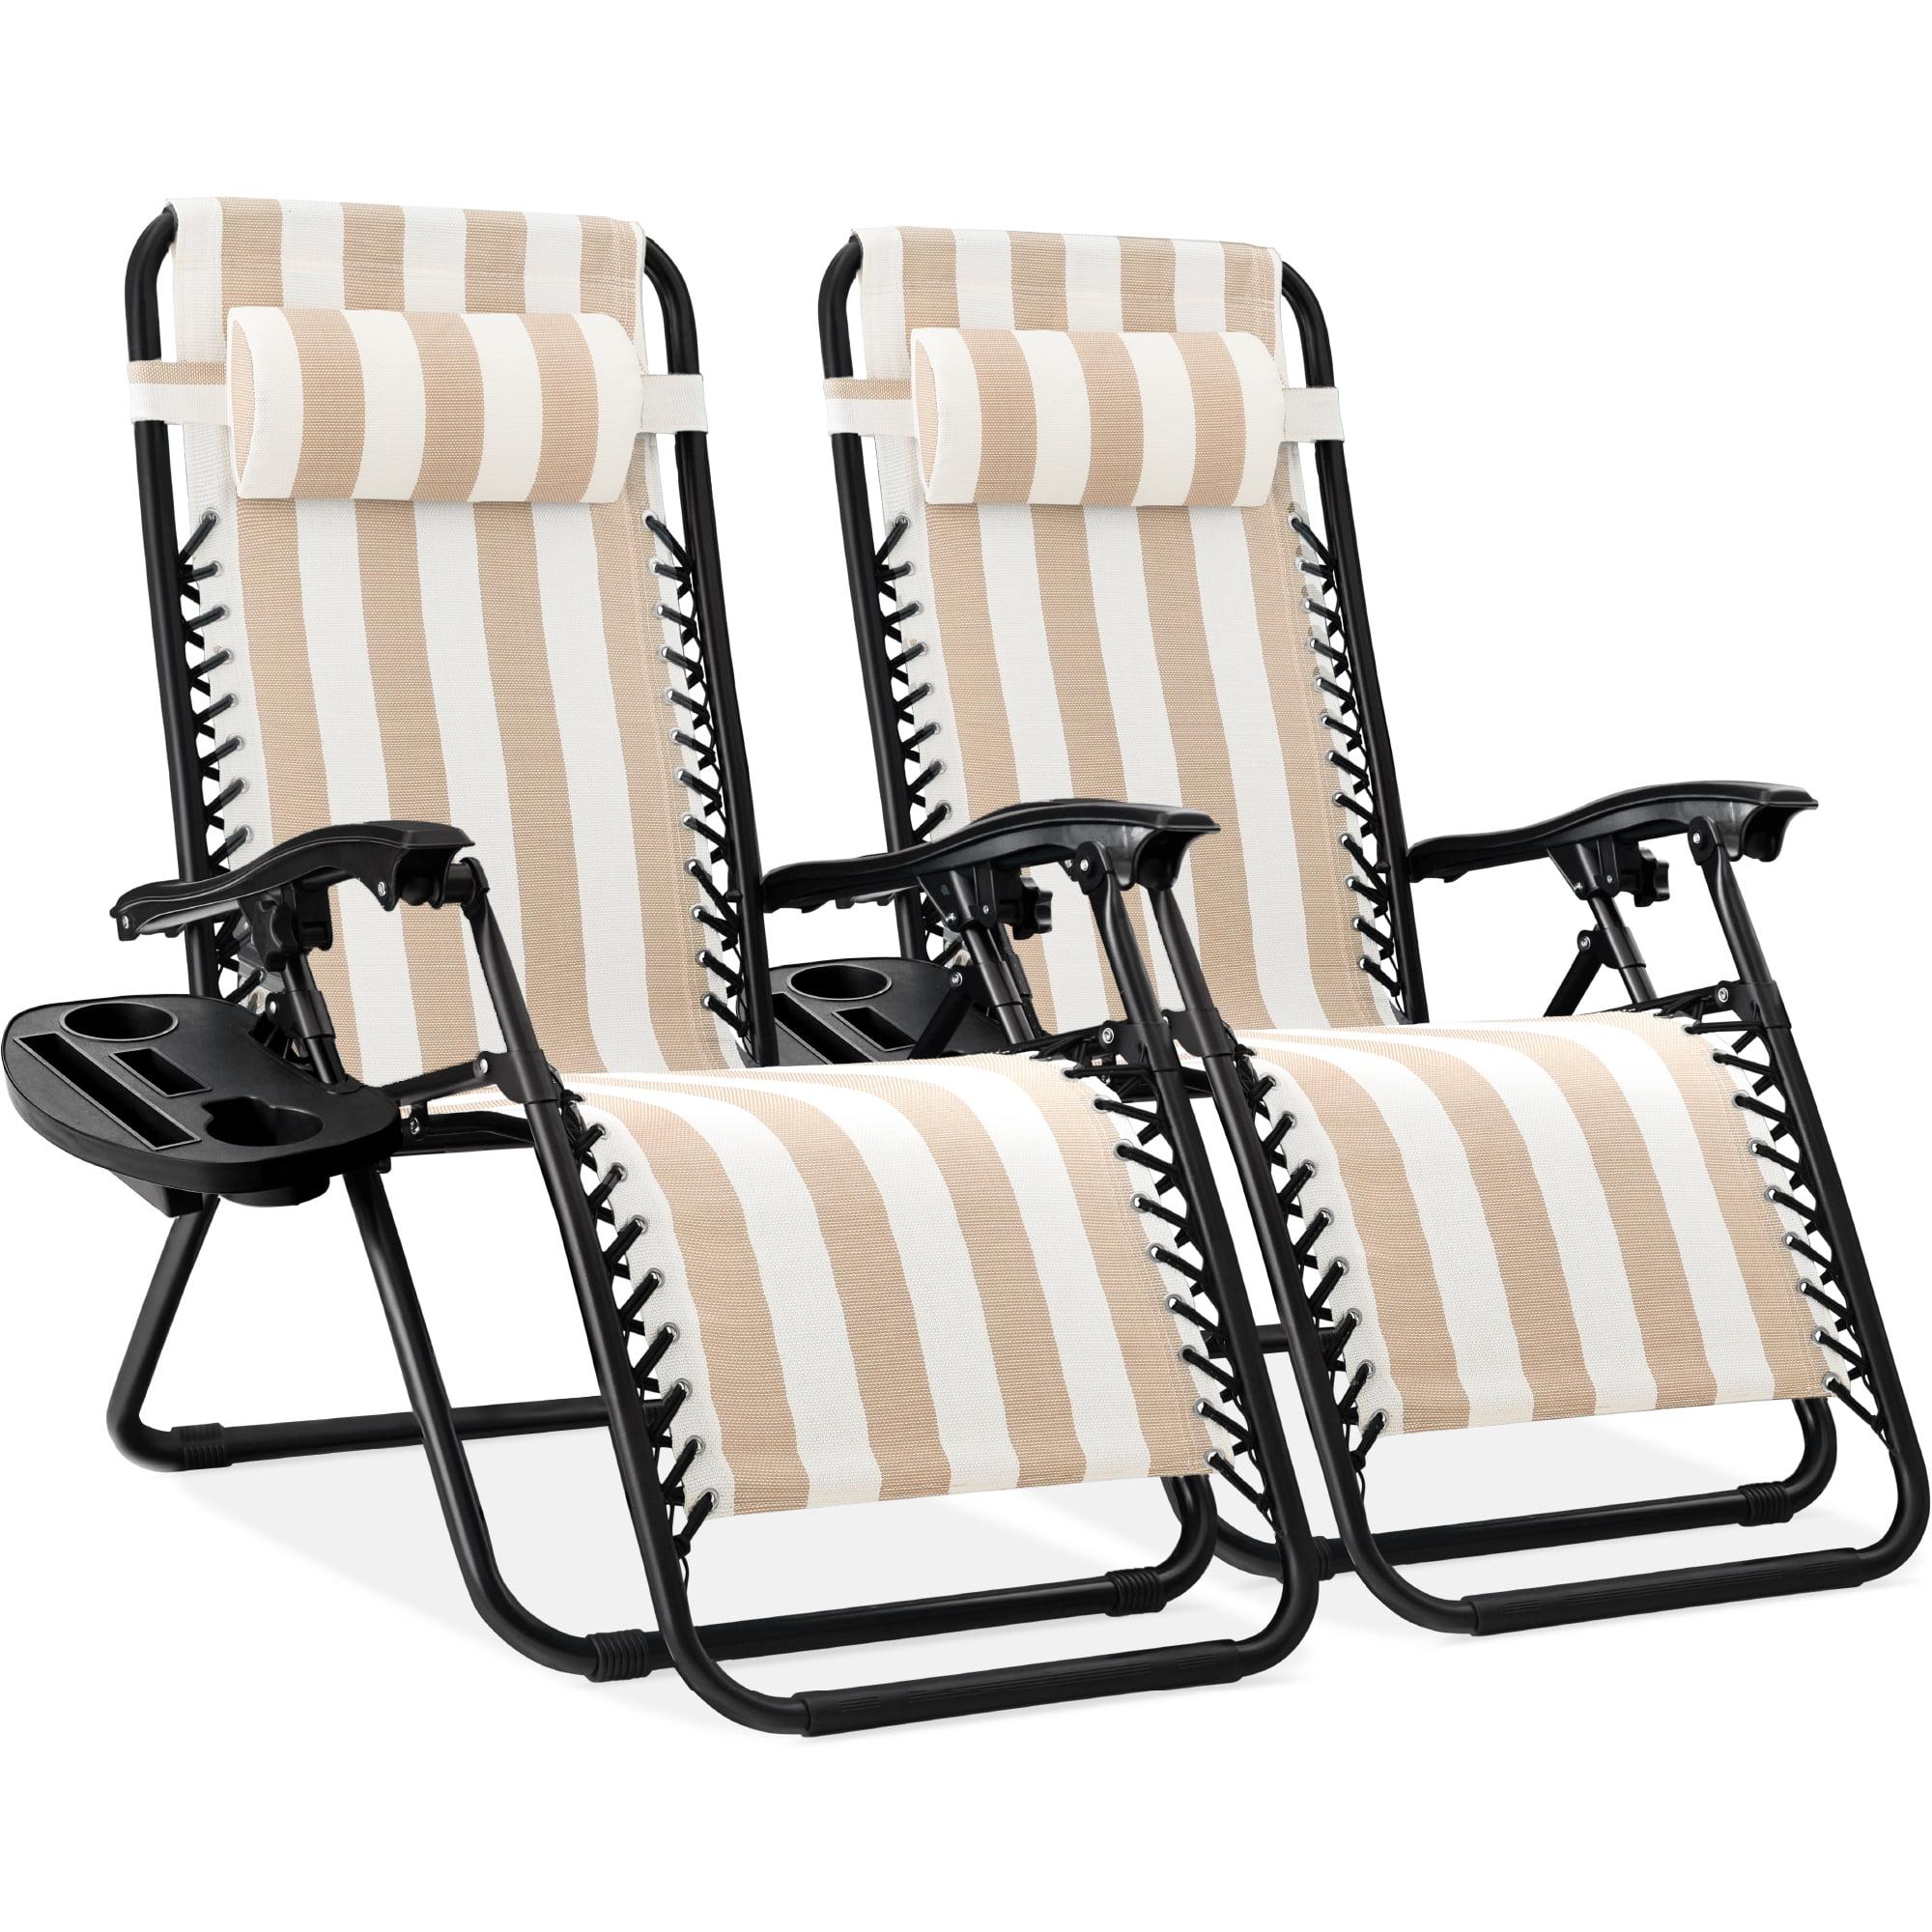 Coastal Tan Striped Zero Gravity Lounge Chair with Cup Holder